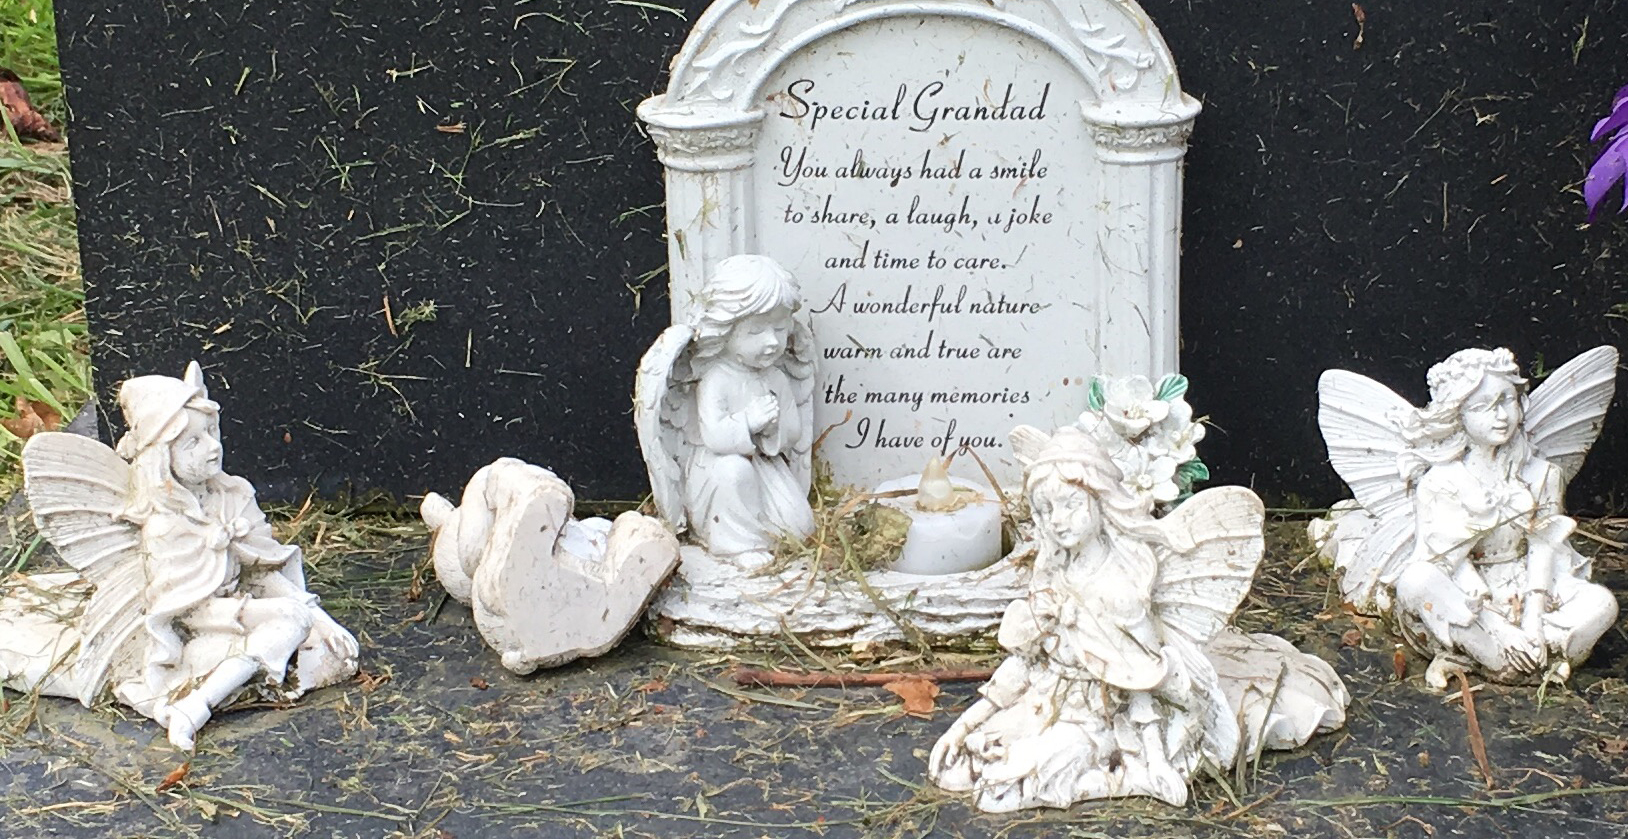 Fairy figurines on a grave